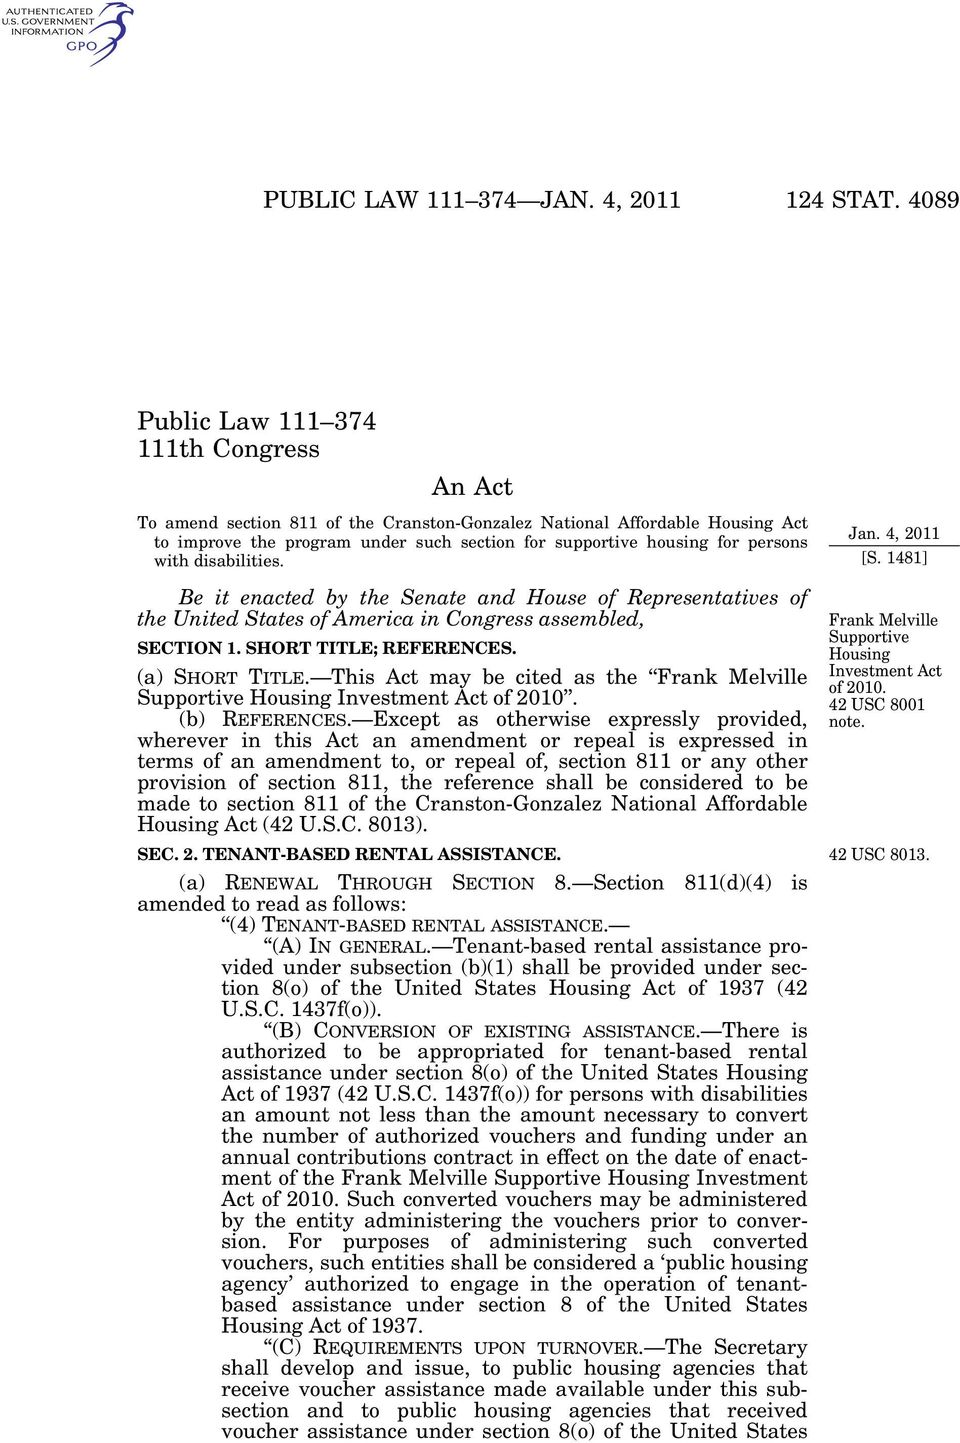 persons with disabilities. Be it enacted by the Senate House of Representatives of the United States of America in Congress assembled, SECTION 1. SHORT TITLE; REFERENCES. (a) SHORT TITLE.